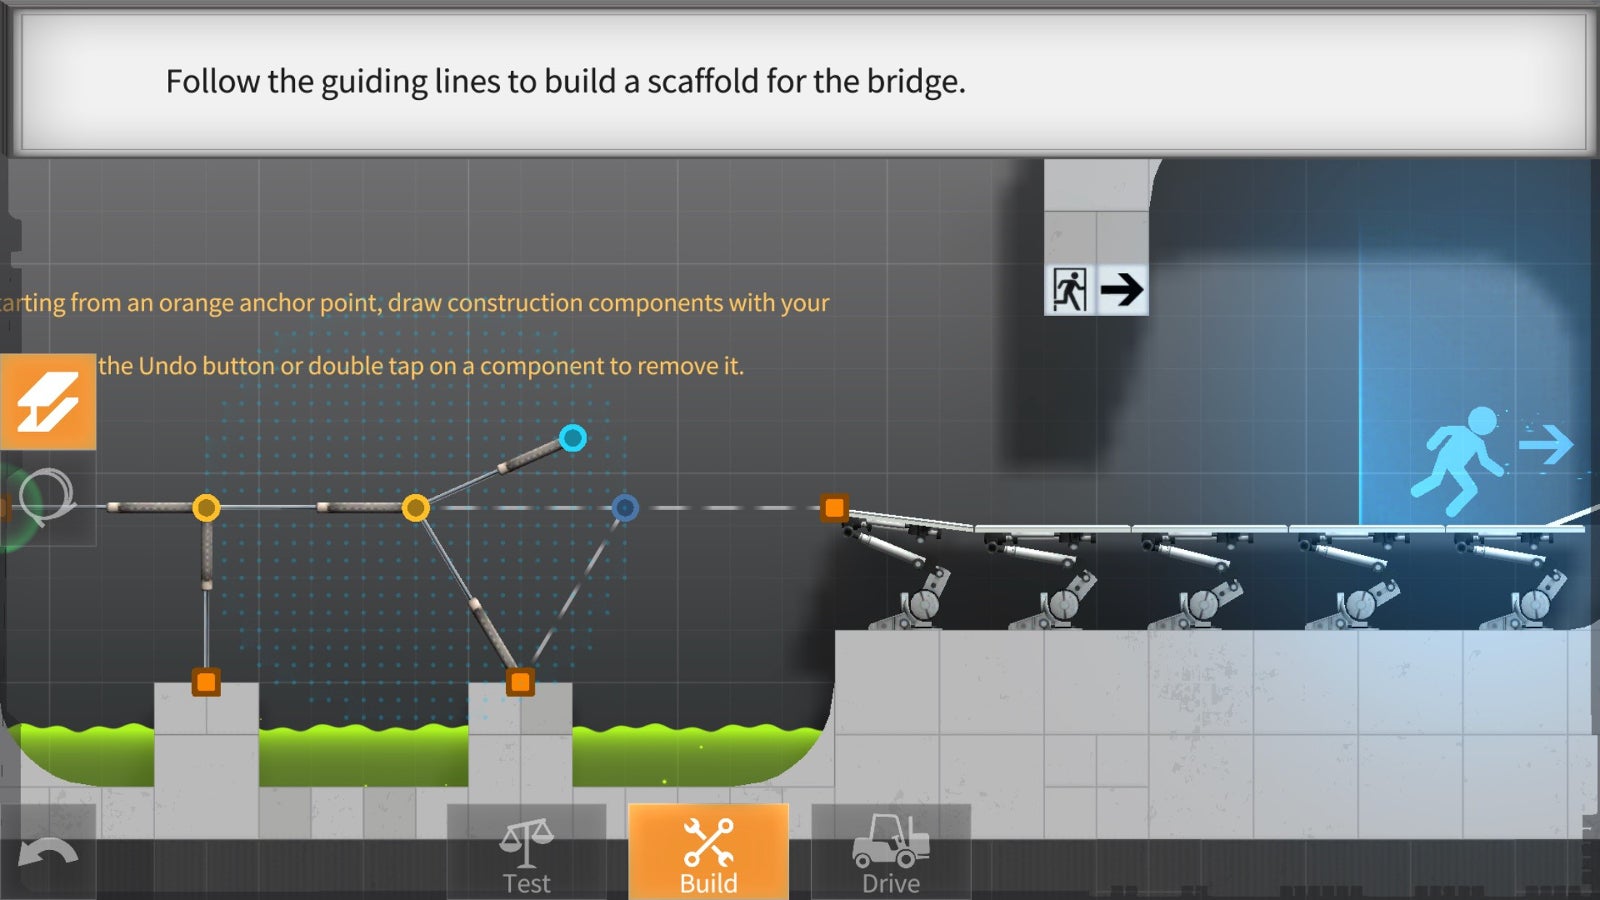 Bridge Constructor Portal review: a puzzler with great physics and witty humor